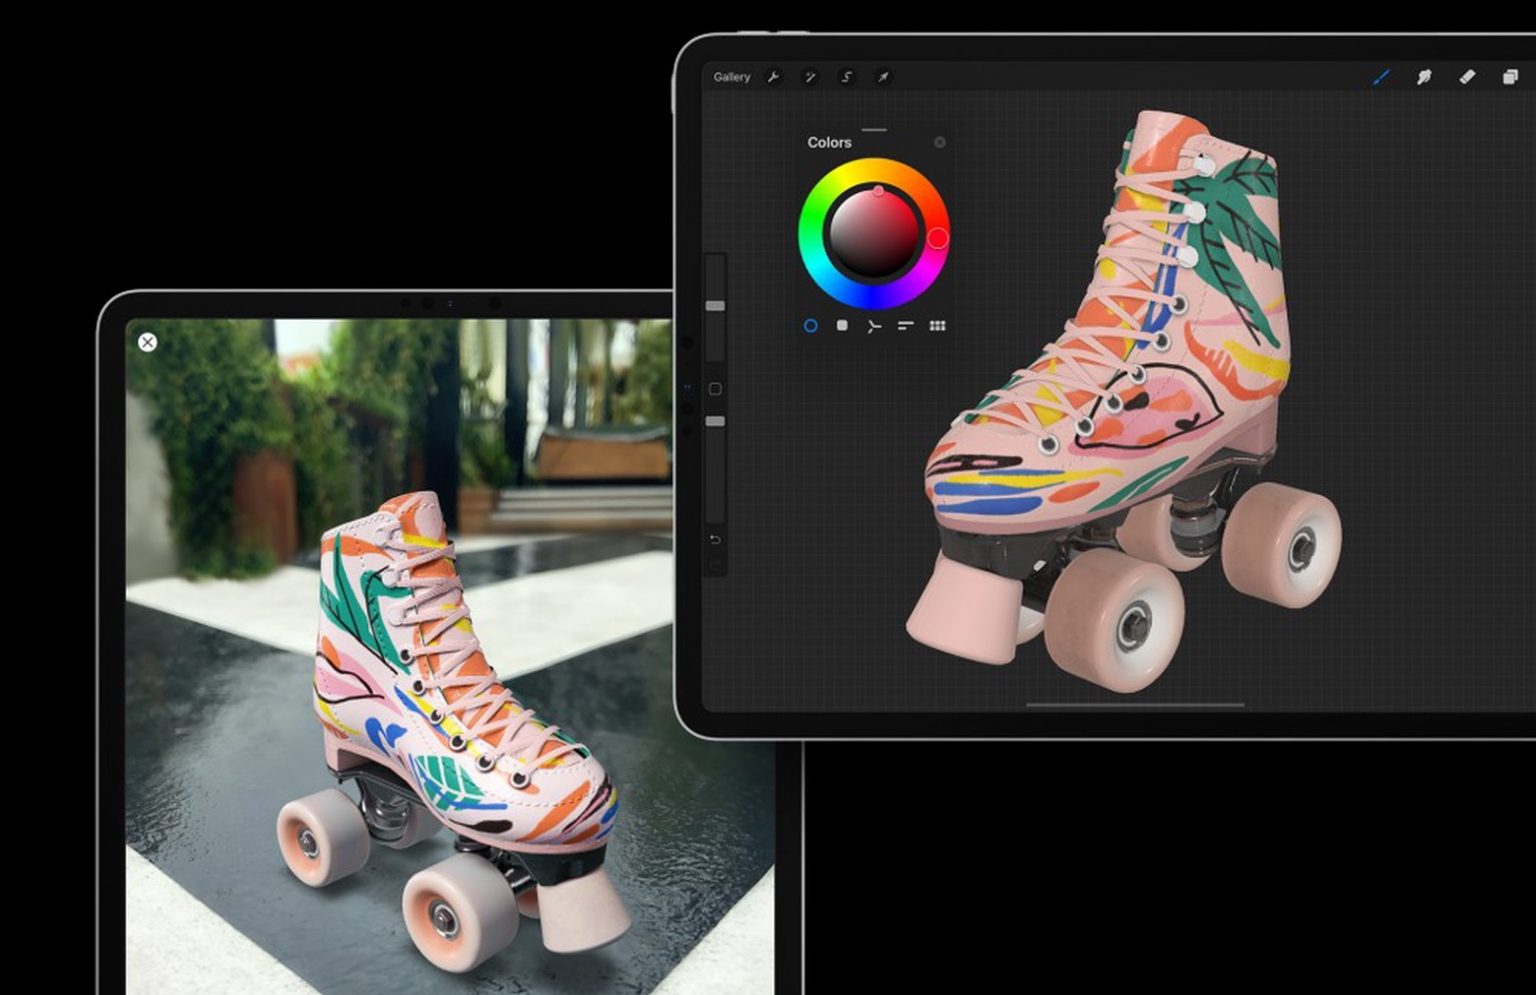 Procreate 5.2 is “coming soon” according to Savage Interactive.